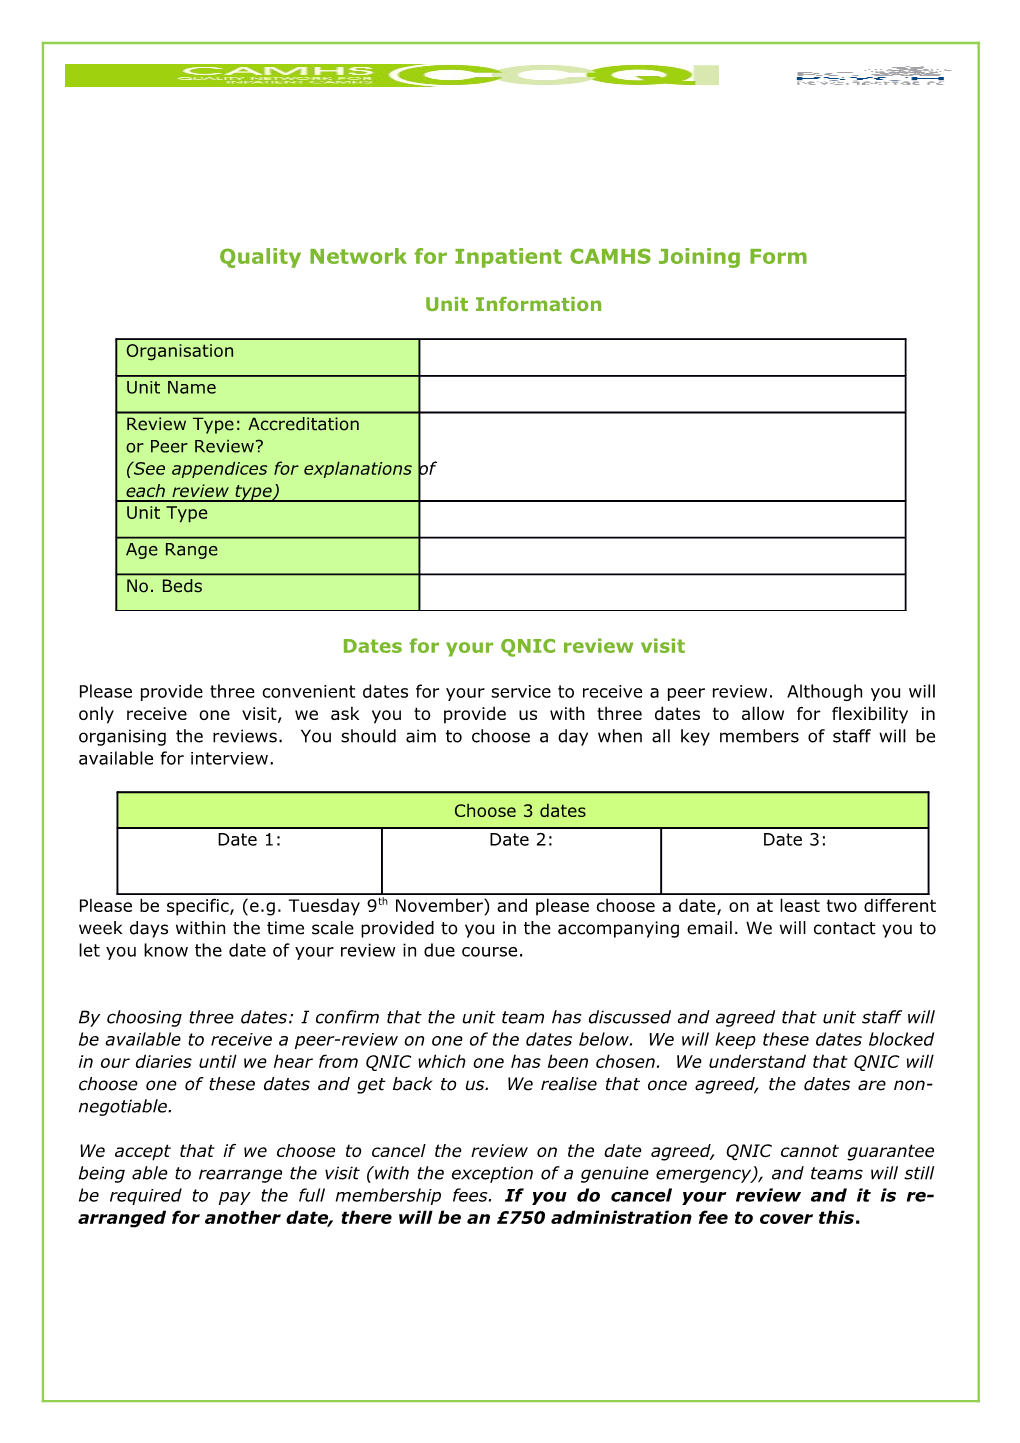 Quality Network for Inpatient CAMHS Joining Form